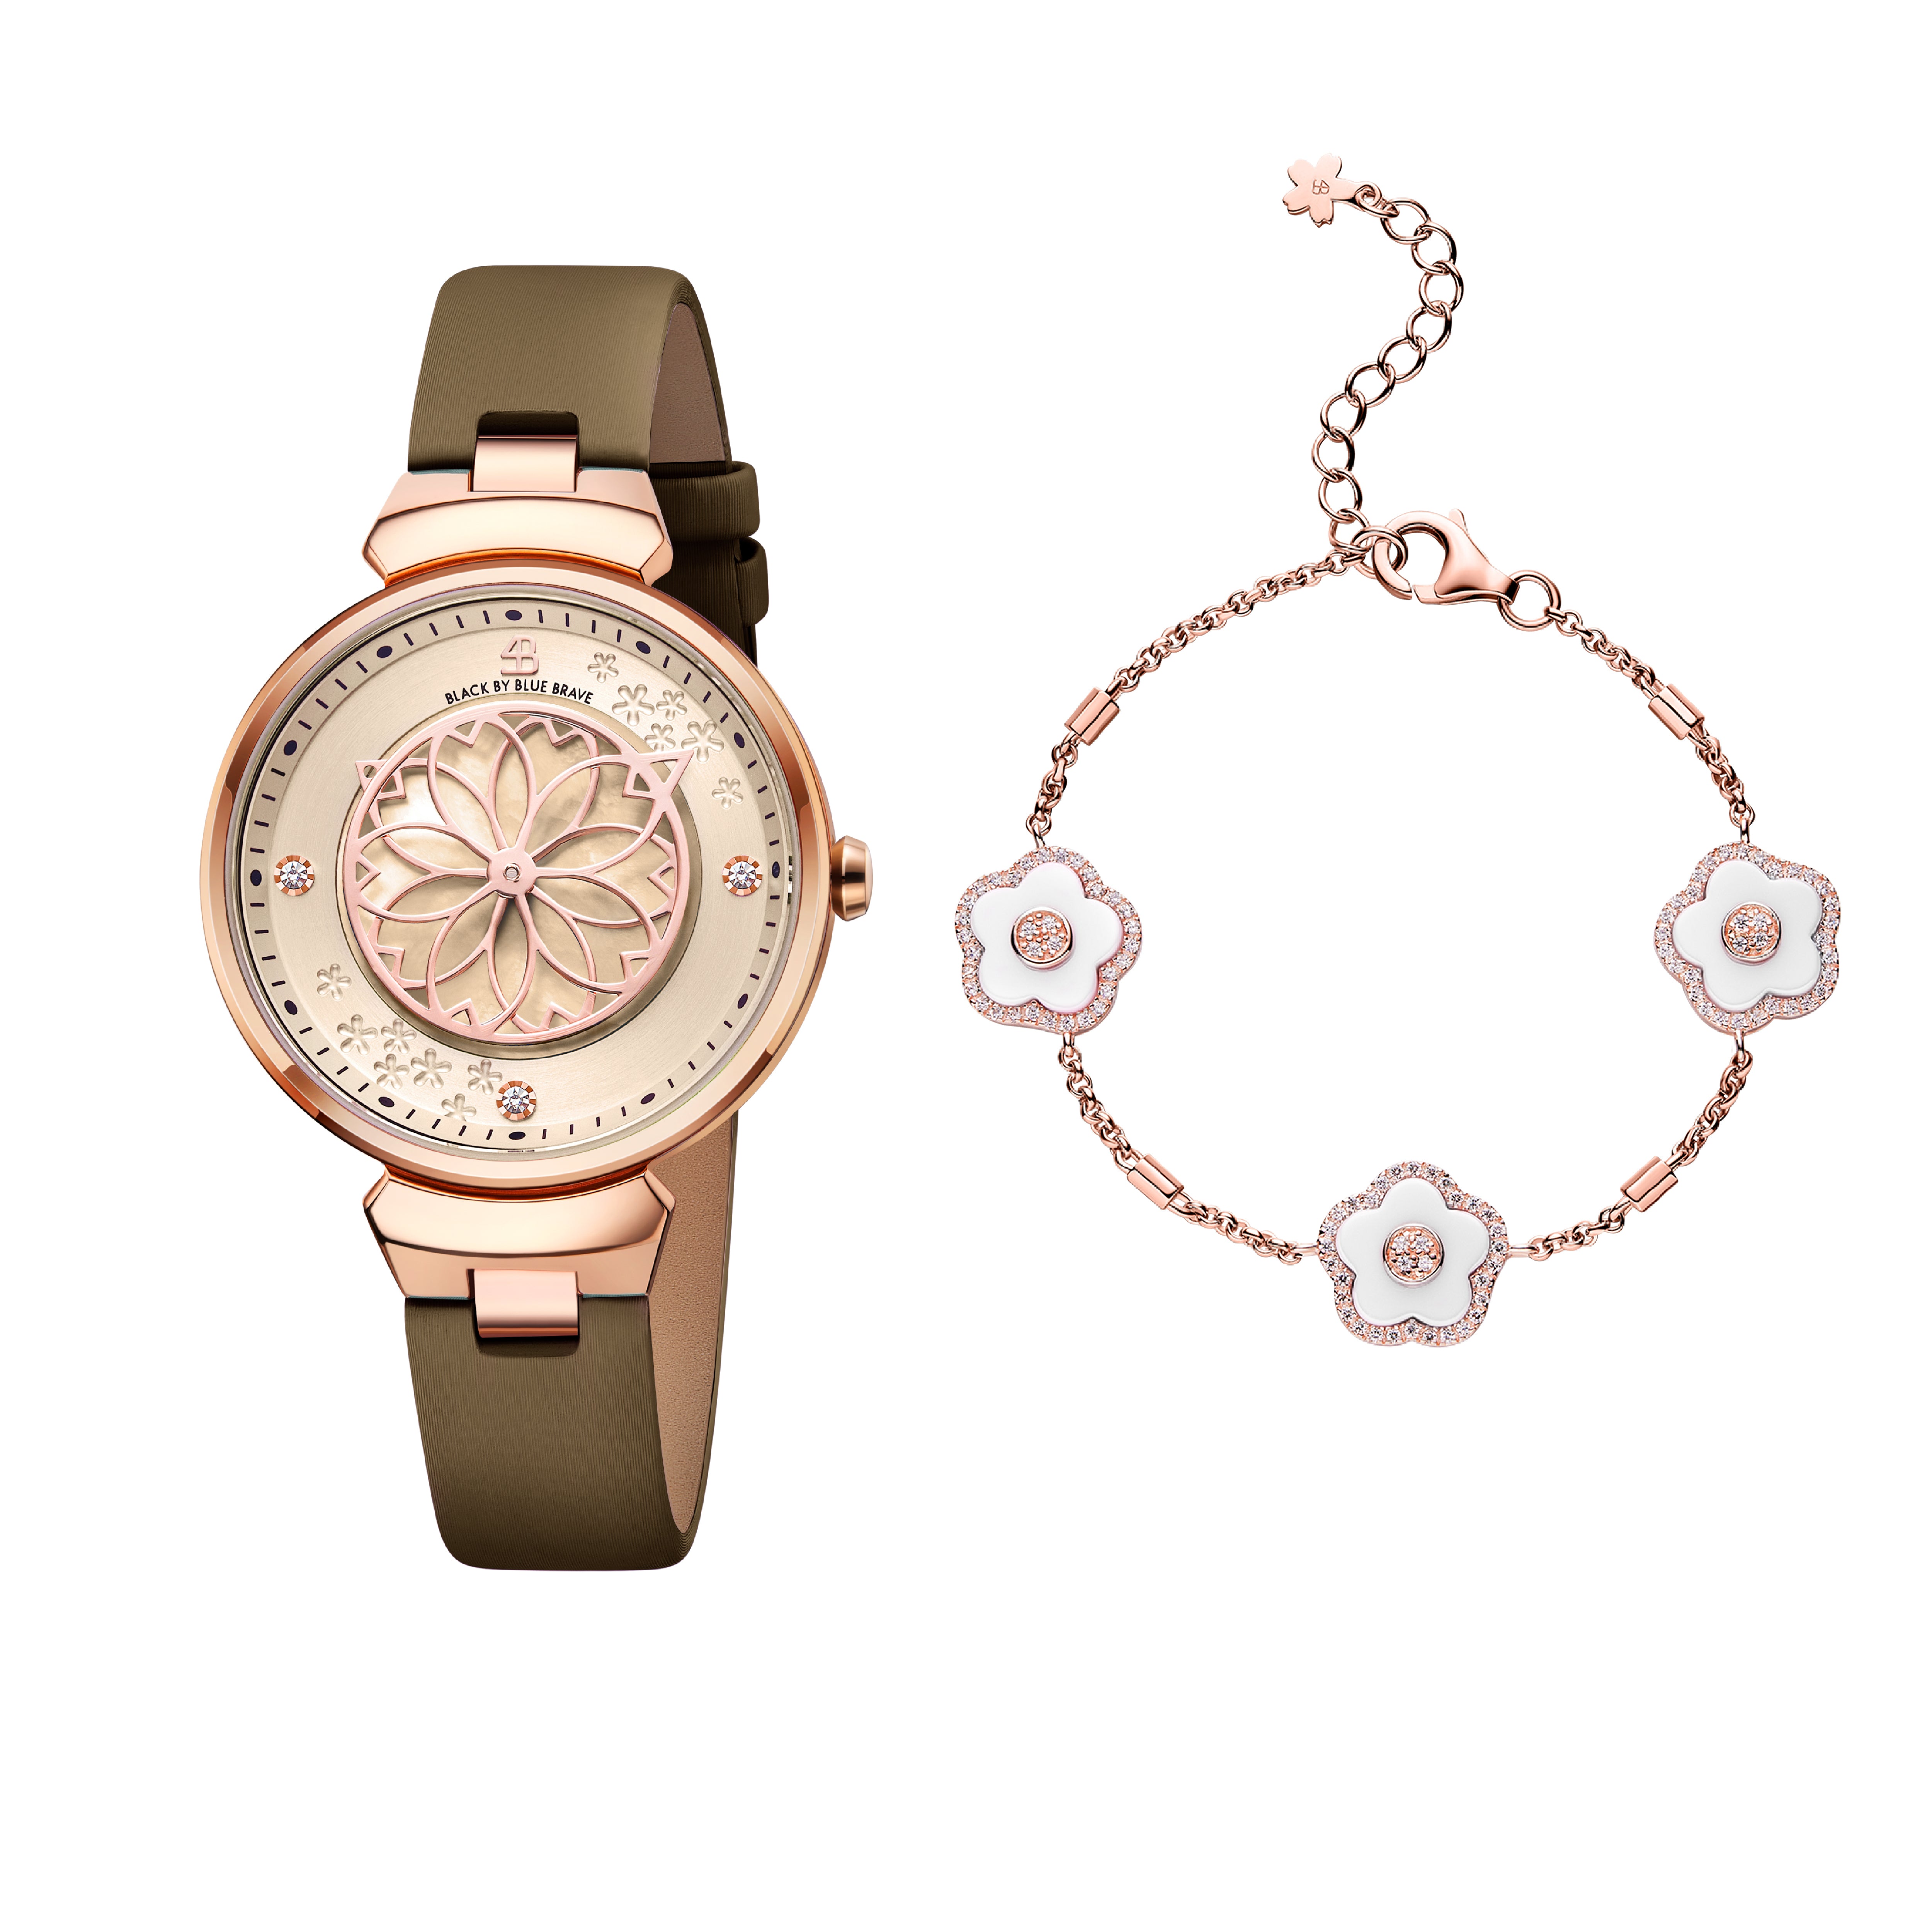 Champagne Cherry Blossom Watch With Rosegold Bracelet & White Ceramic